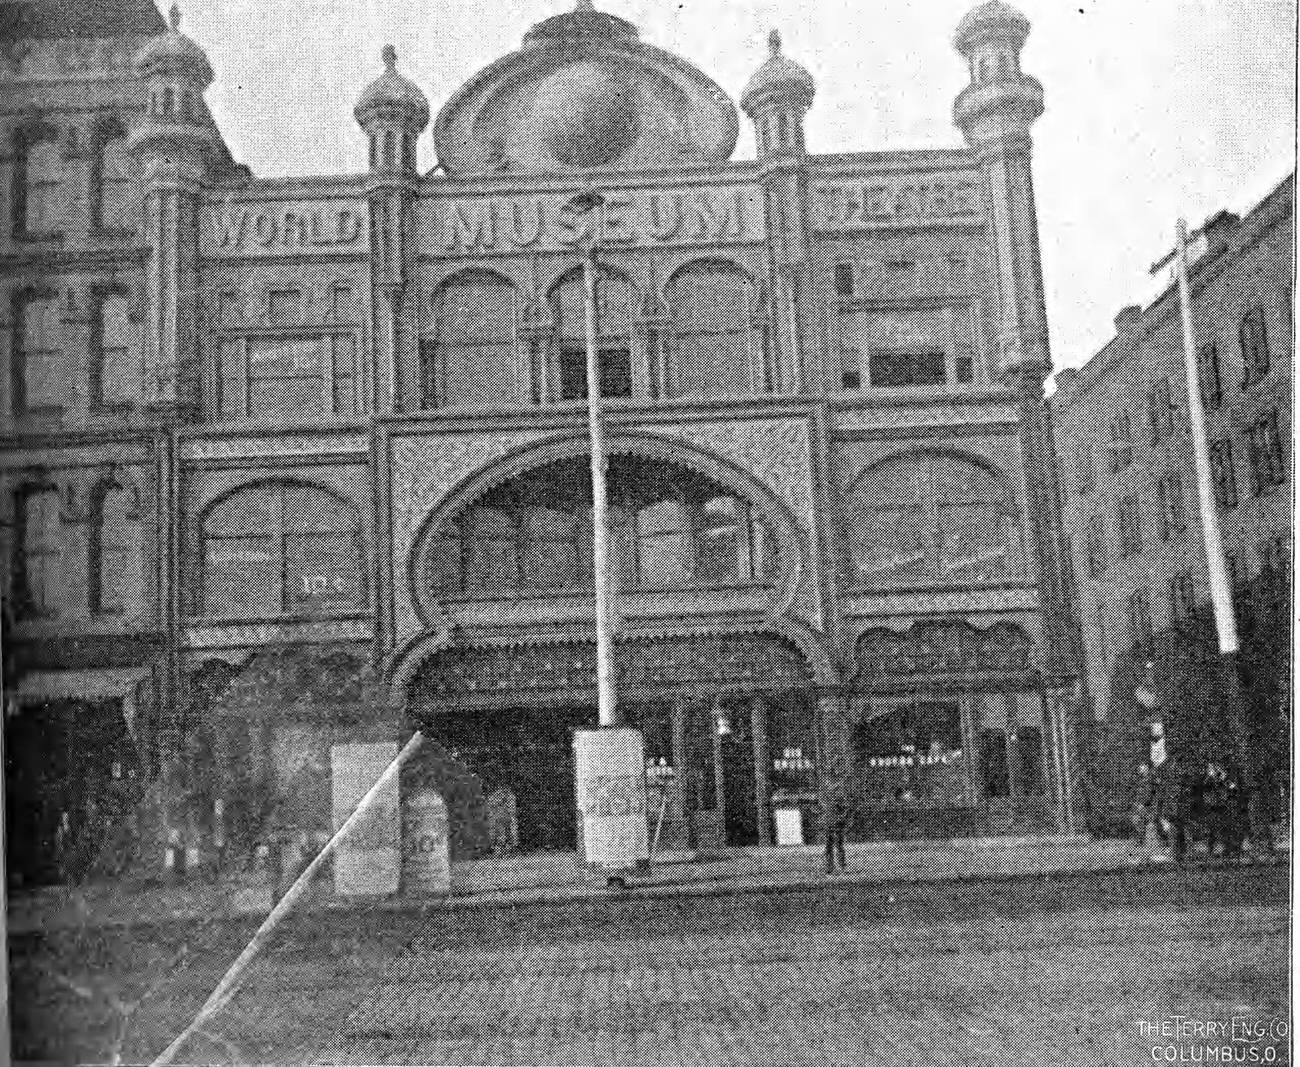 World Museum Theatre site, later High Street Theatre, 1898